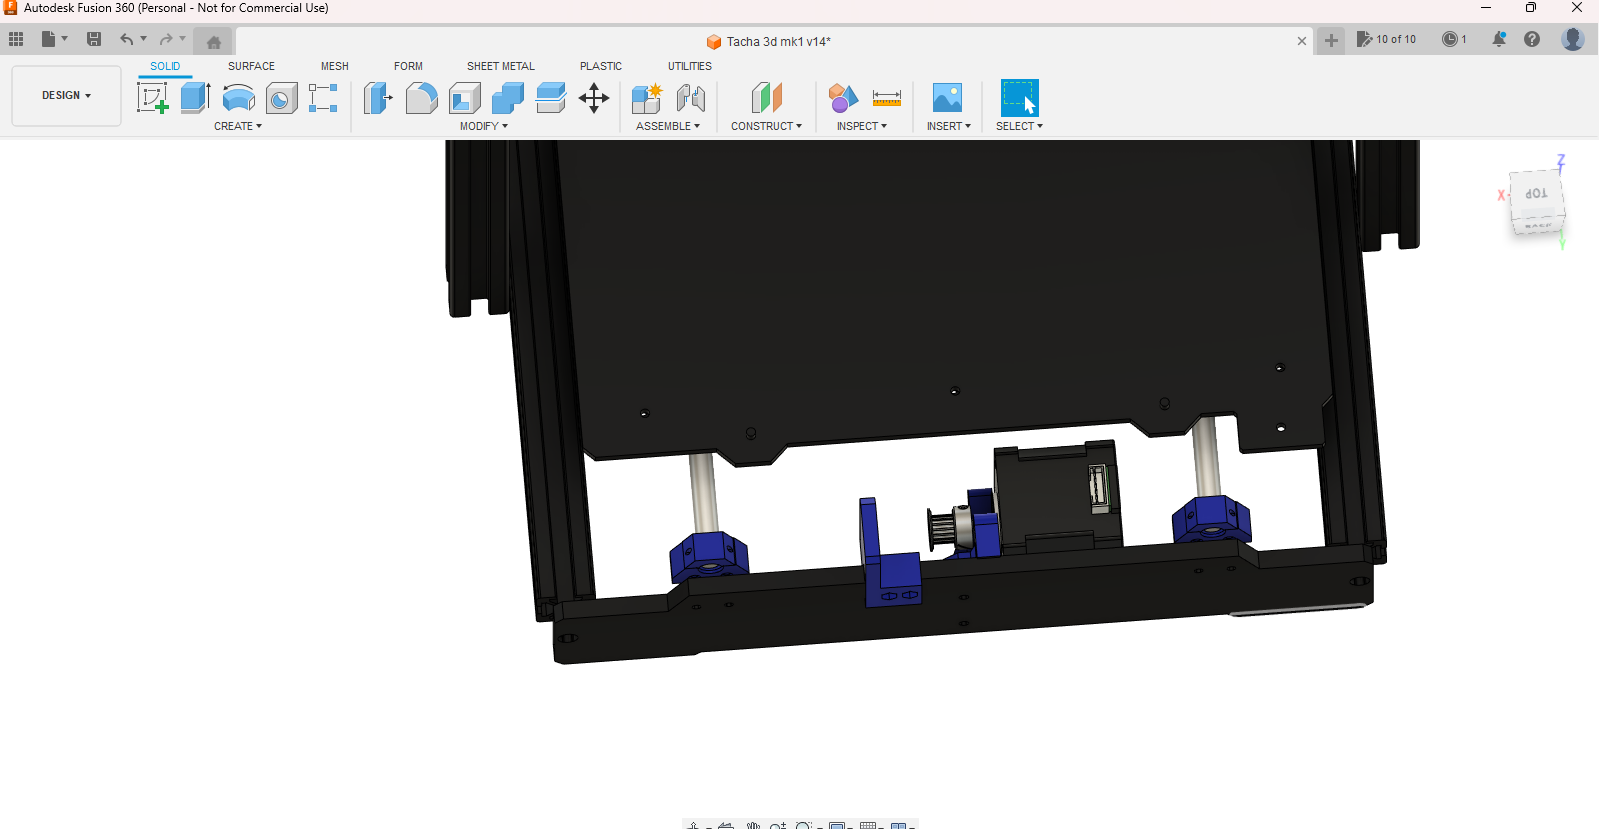 Autodesk Fusion 360 (Personal - Not for Commercial Use) 6_30_2023 9_32_39 PM.png